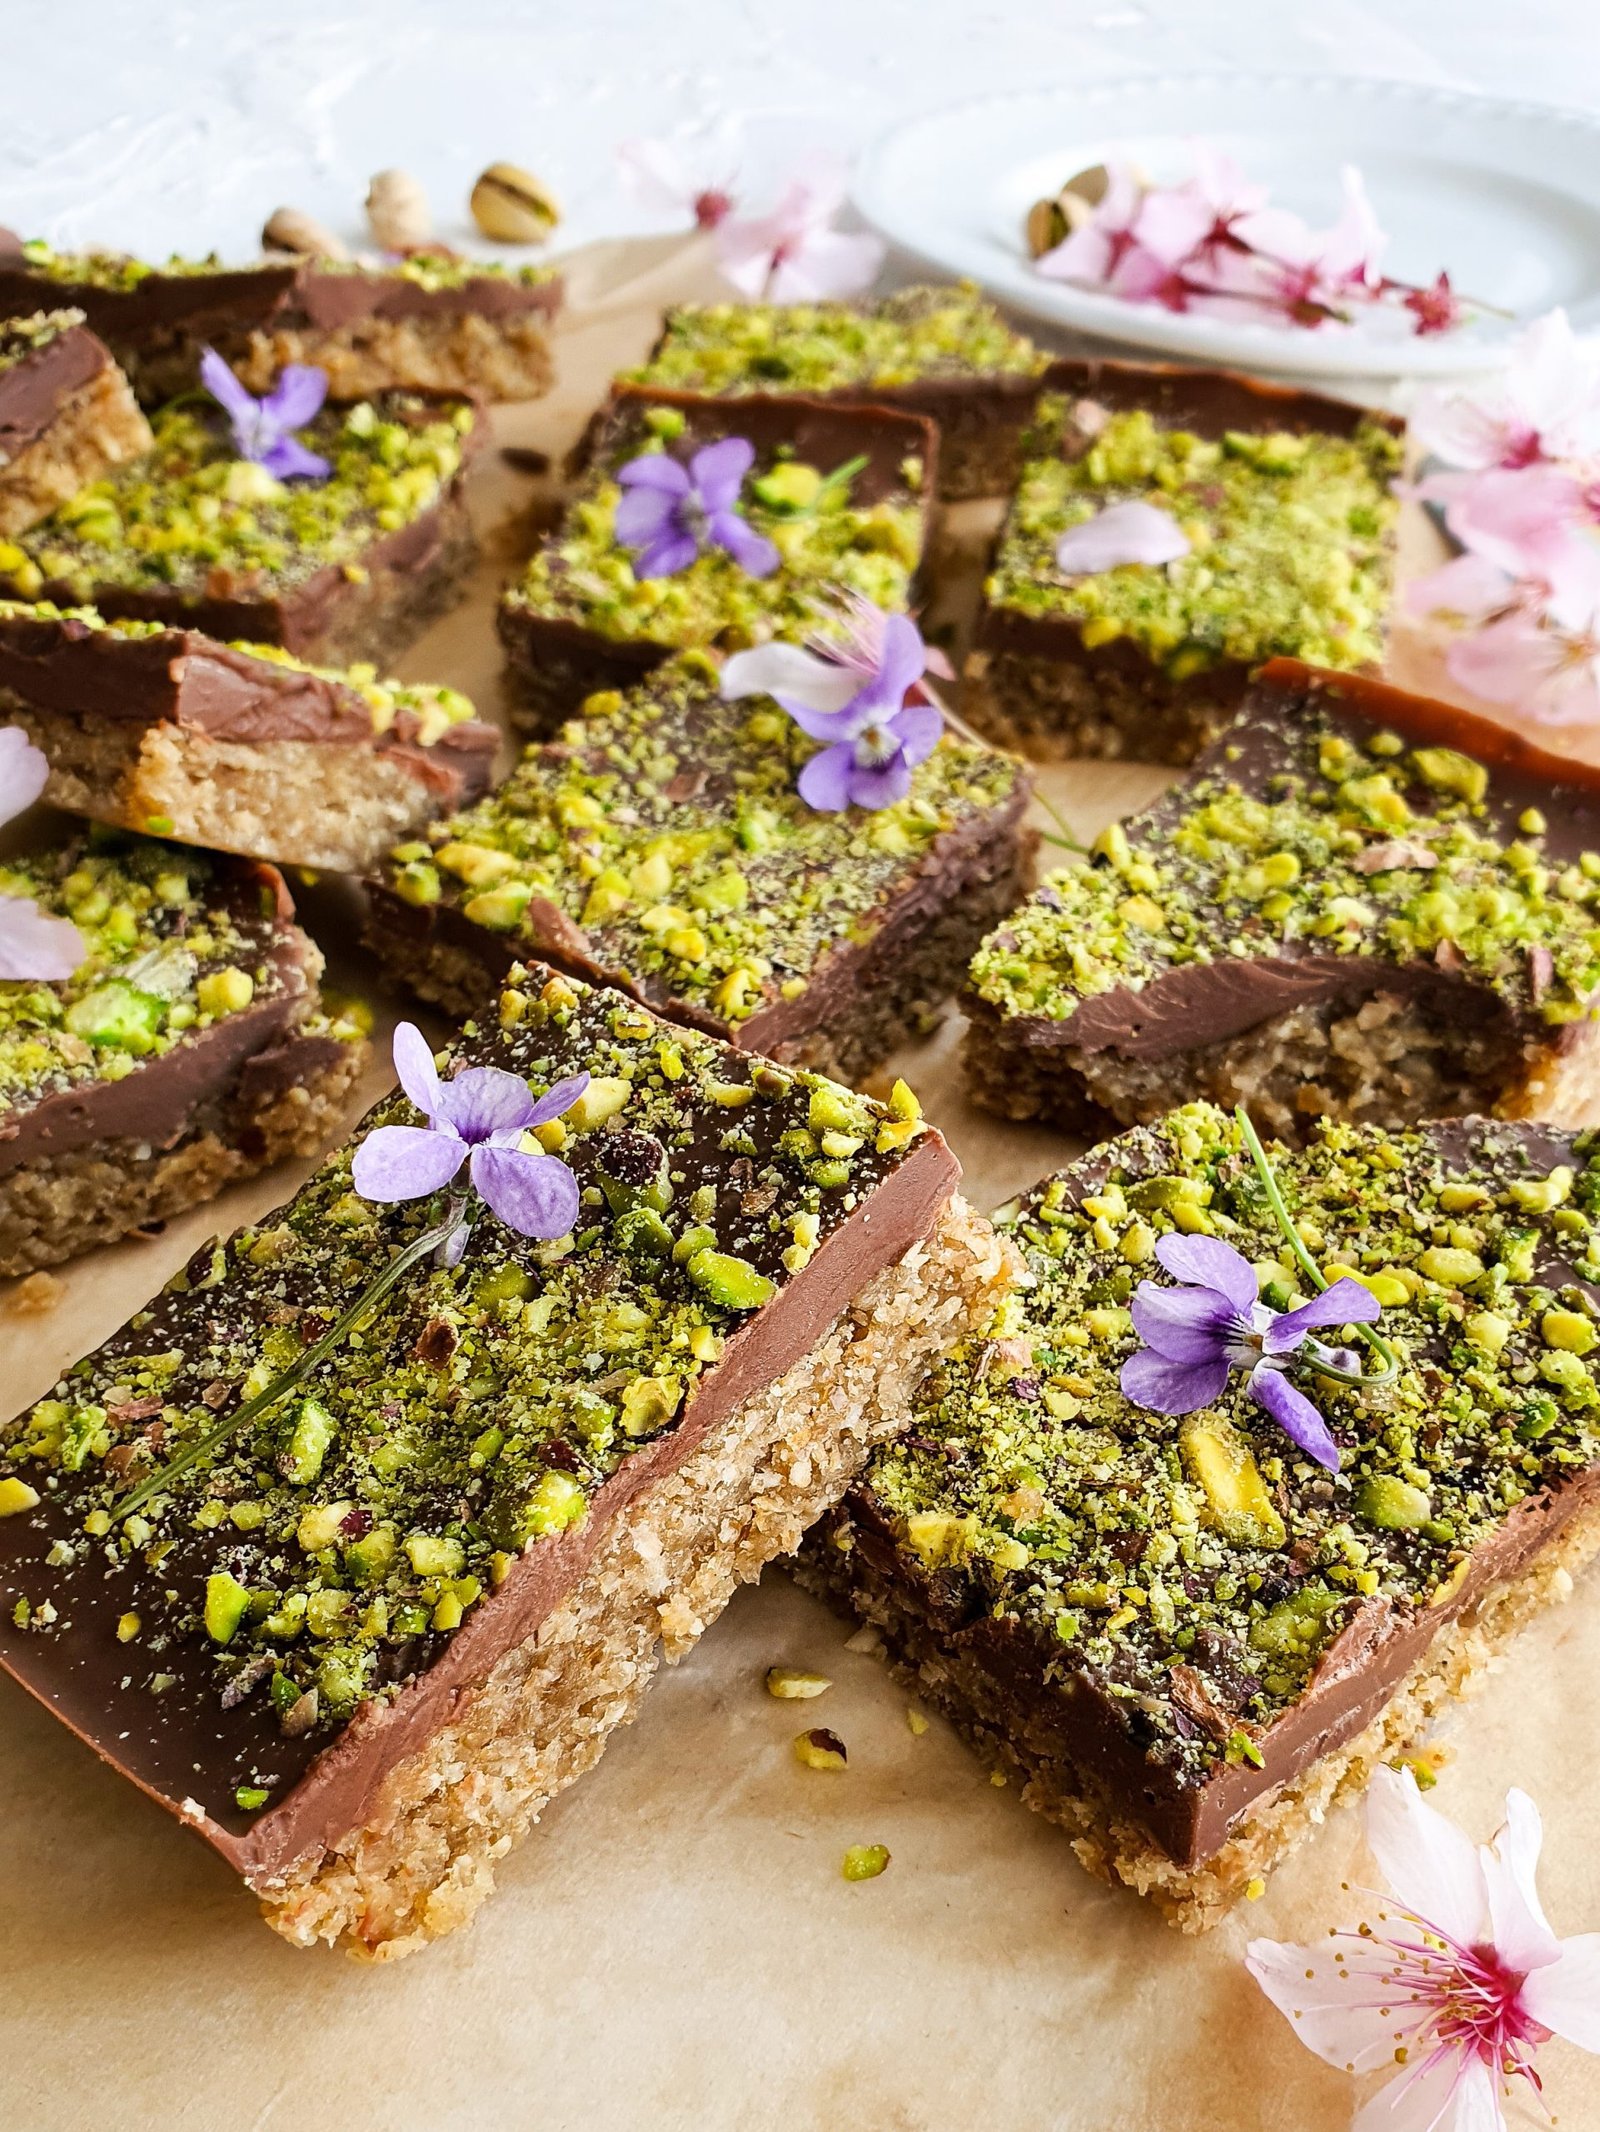 A tray of chewy, nutty bars made with wholesome ingredients, including tahini, sweet dates, crunchy pistachios, and a hint of vanilla. Perfect for a healthy snack.